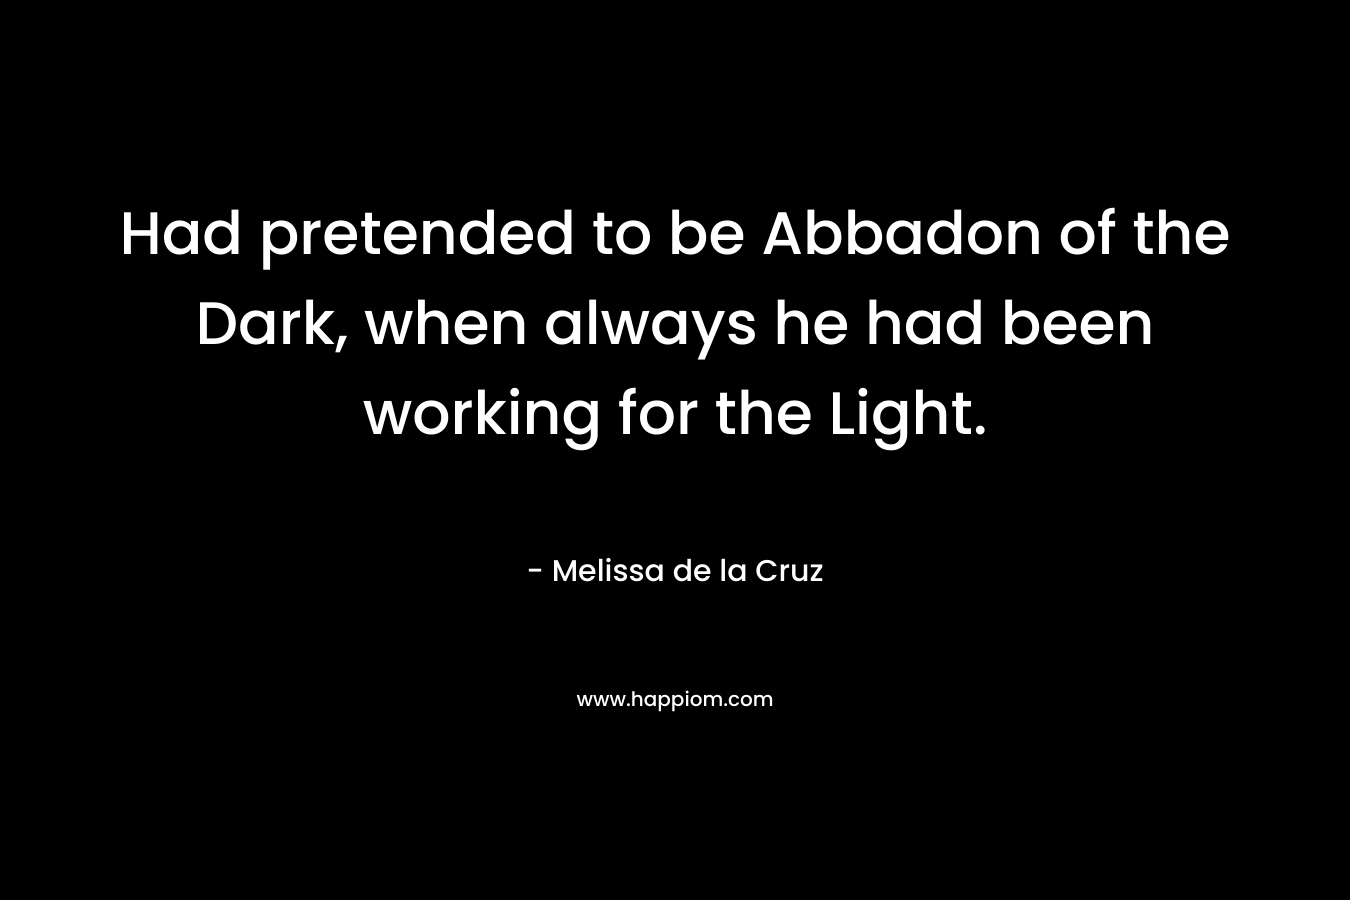 Had pretended to be Abbadon of the Dark, when always he had been working for the Light.